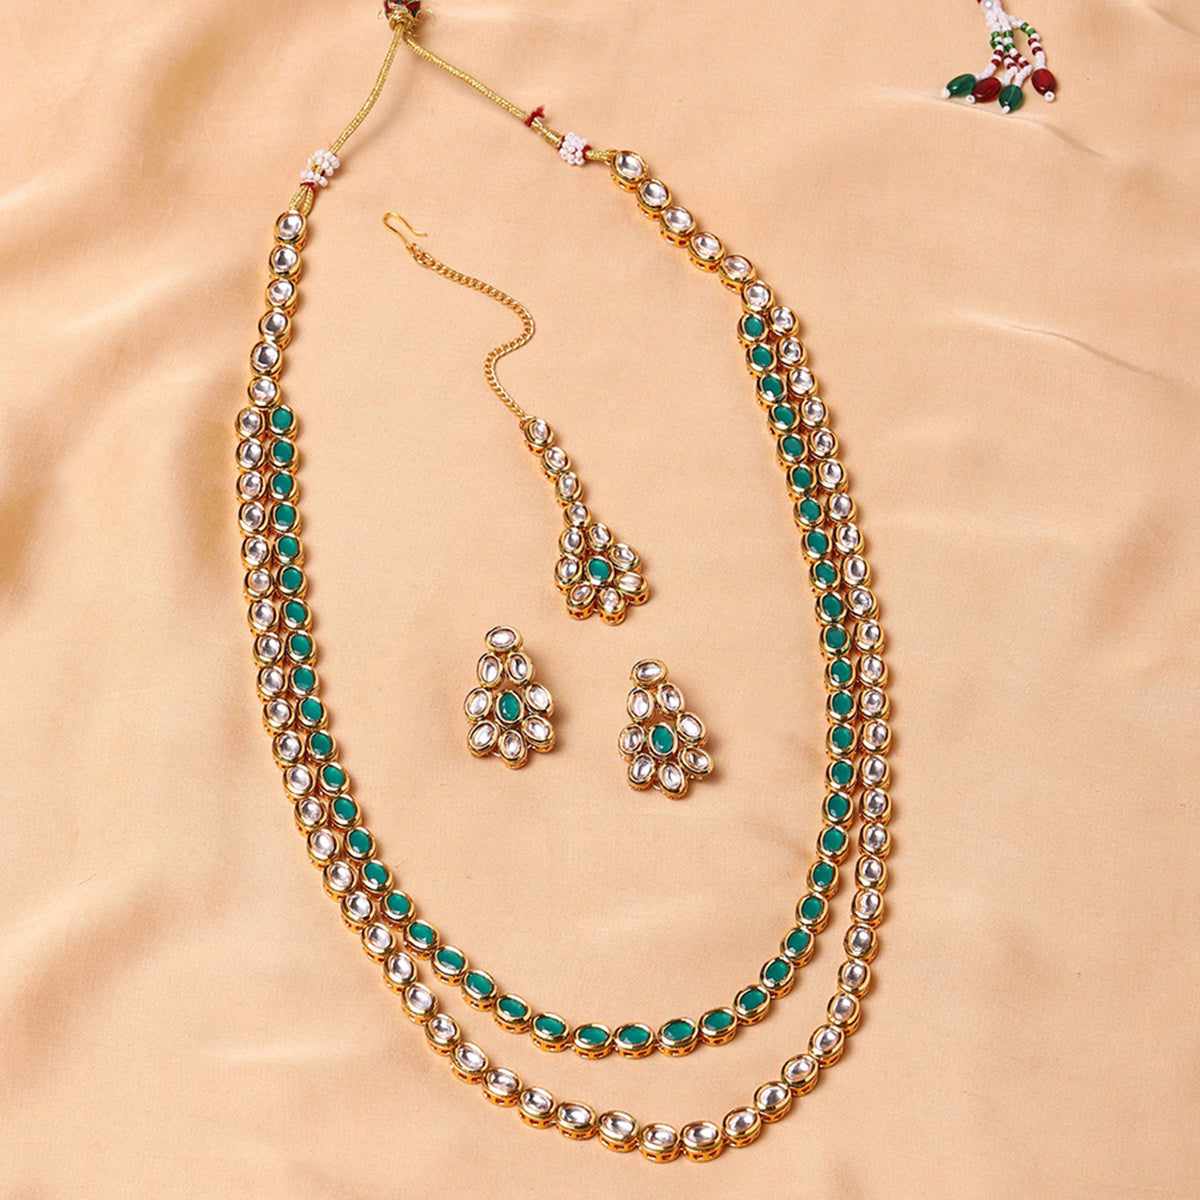 Kundan Gold Plated Long Necklace Set with Green Stones